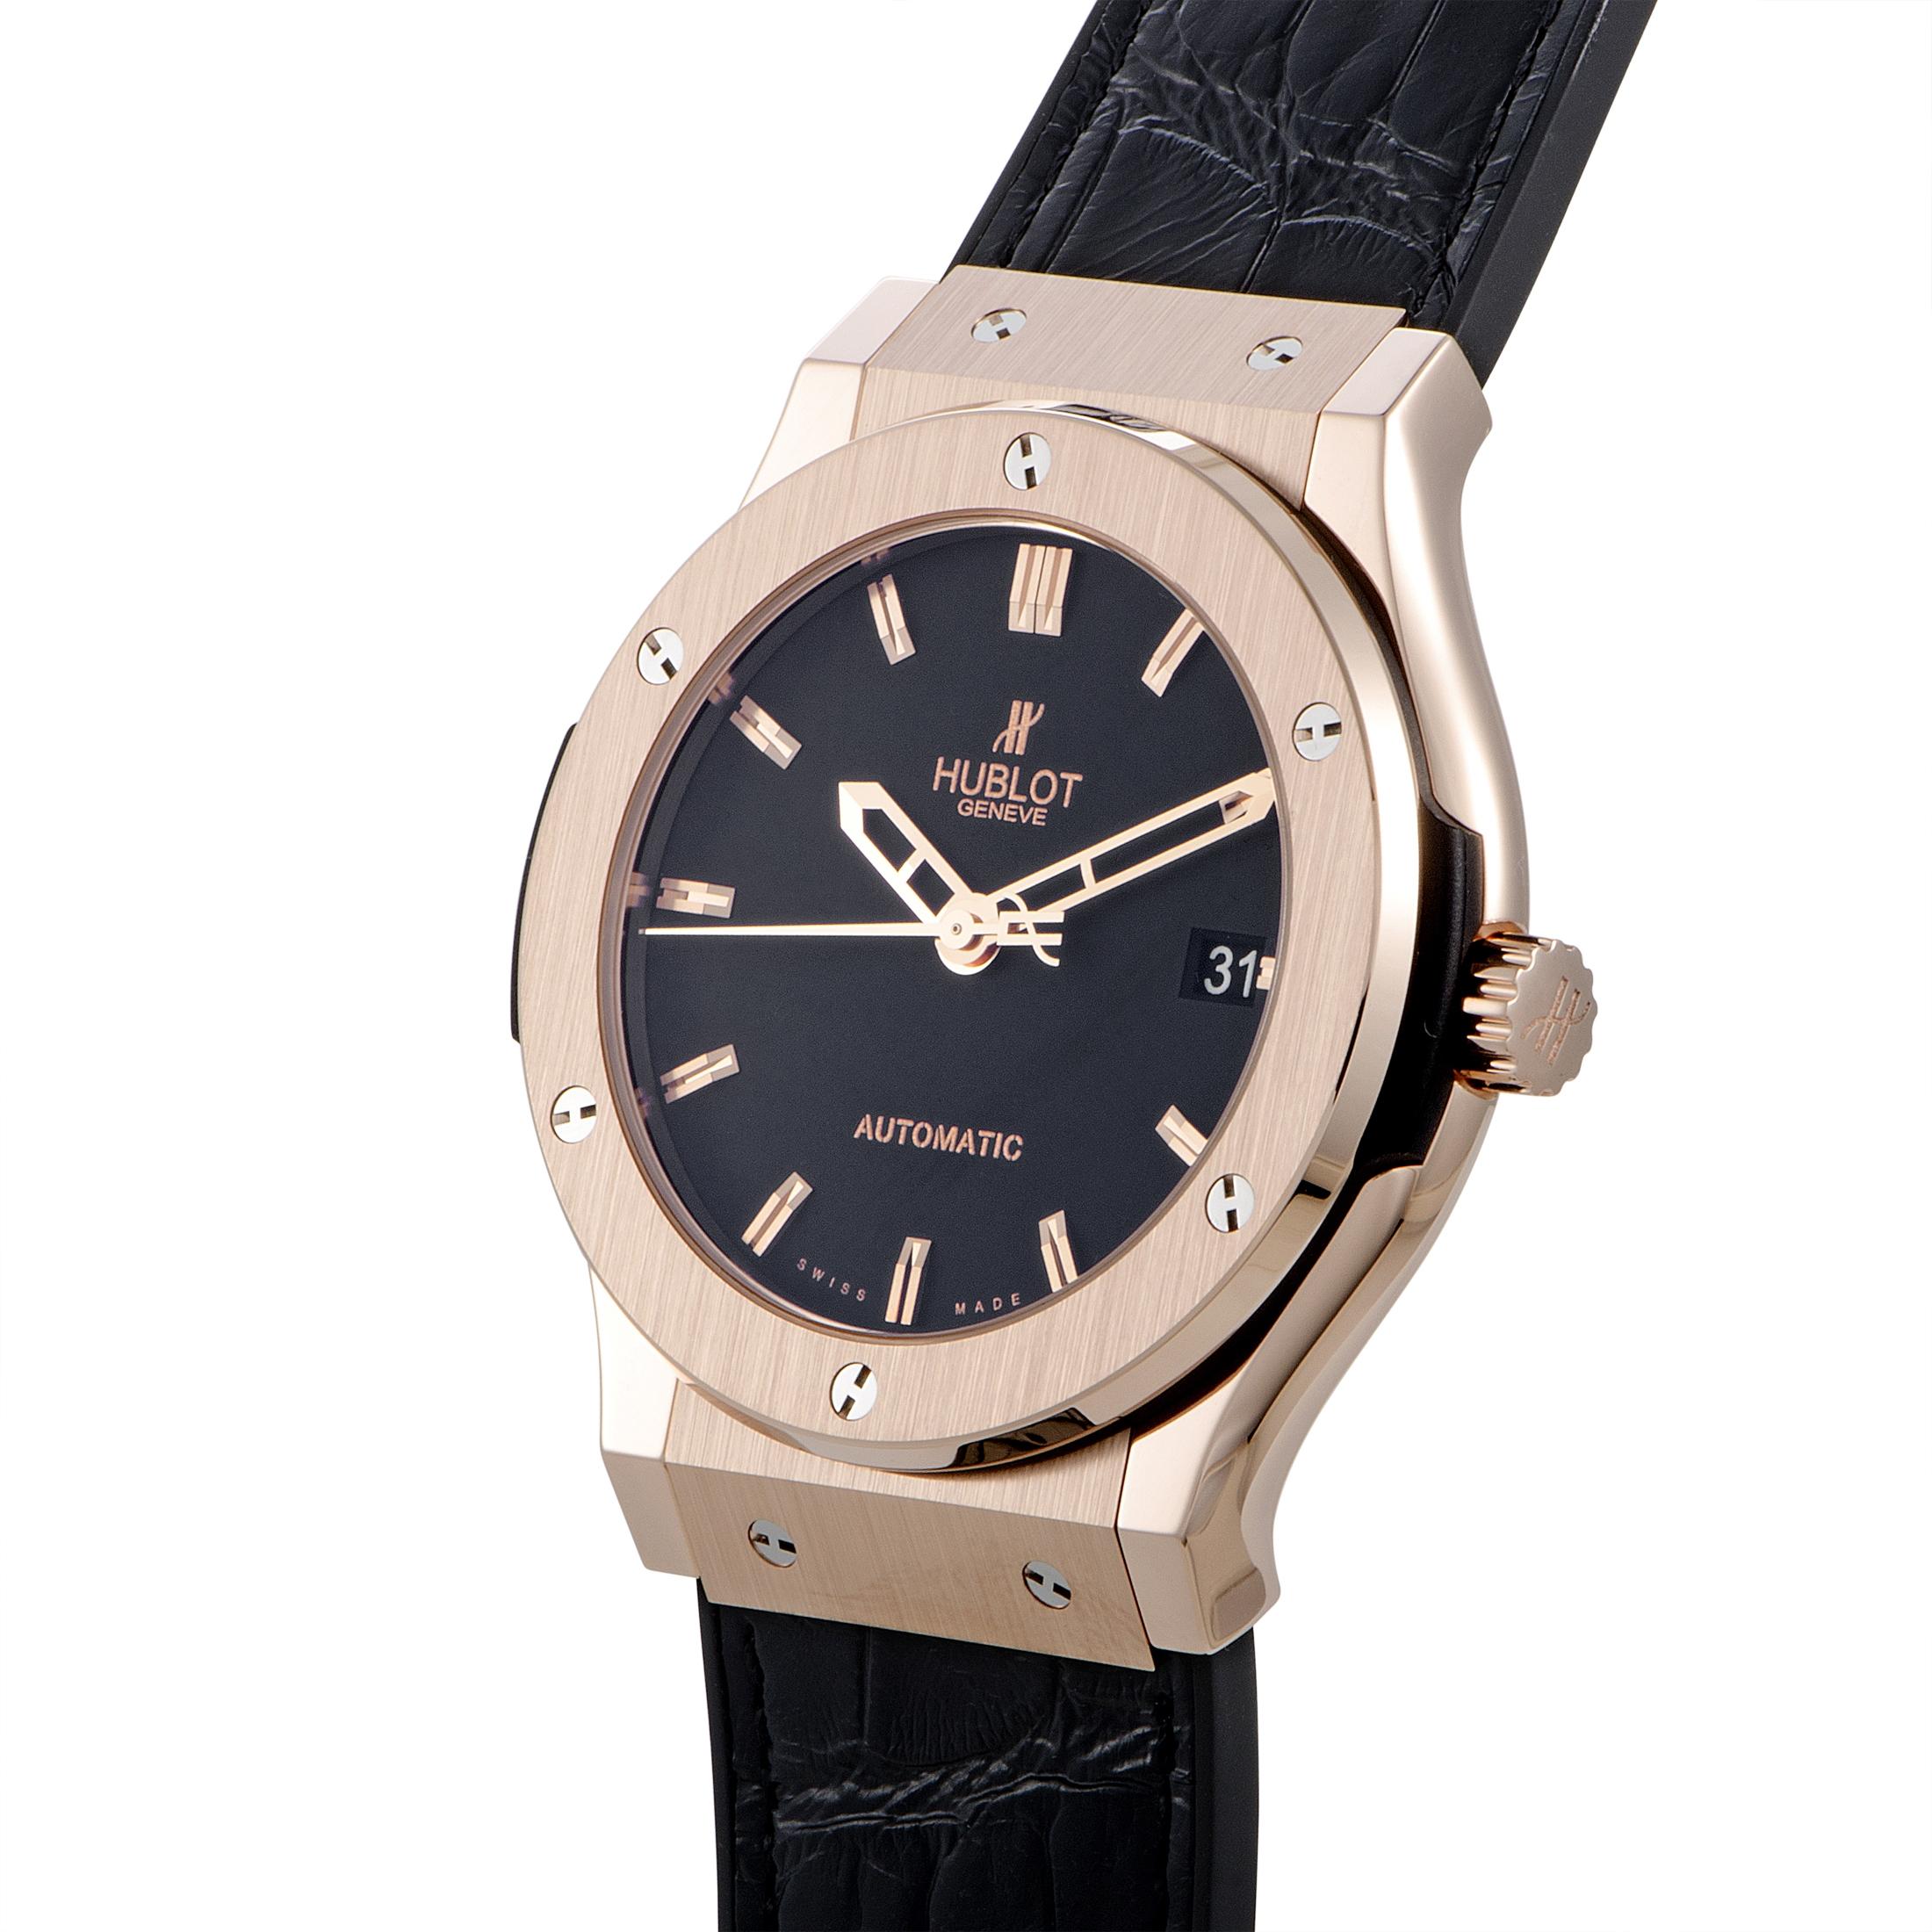 The Hublot Classic Fusion King Gold 45 mm, reference number 511.OX.1180.LR, is a member of the renowned “Classic Fusion” collection.

It is presented with a 45 mm case made of 18K King gold that boasts see-through back. The case is mounted onto a